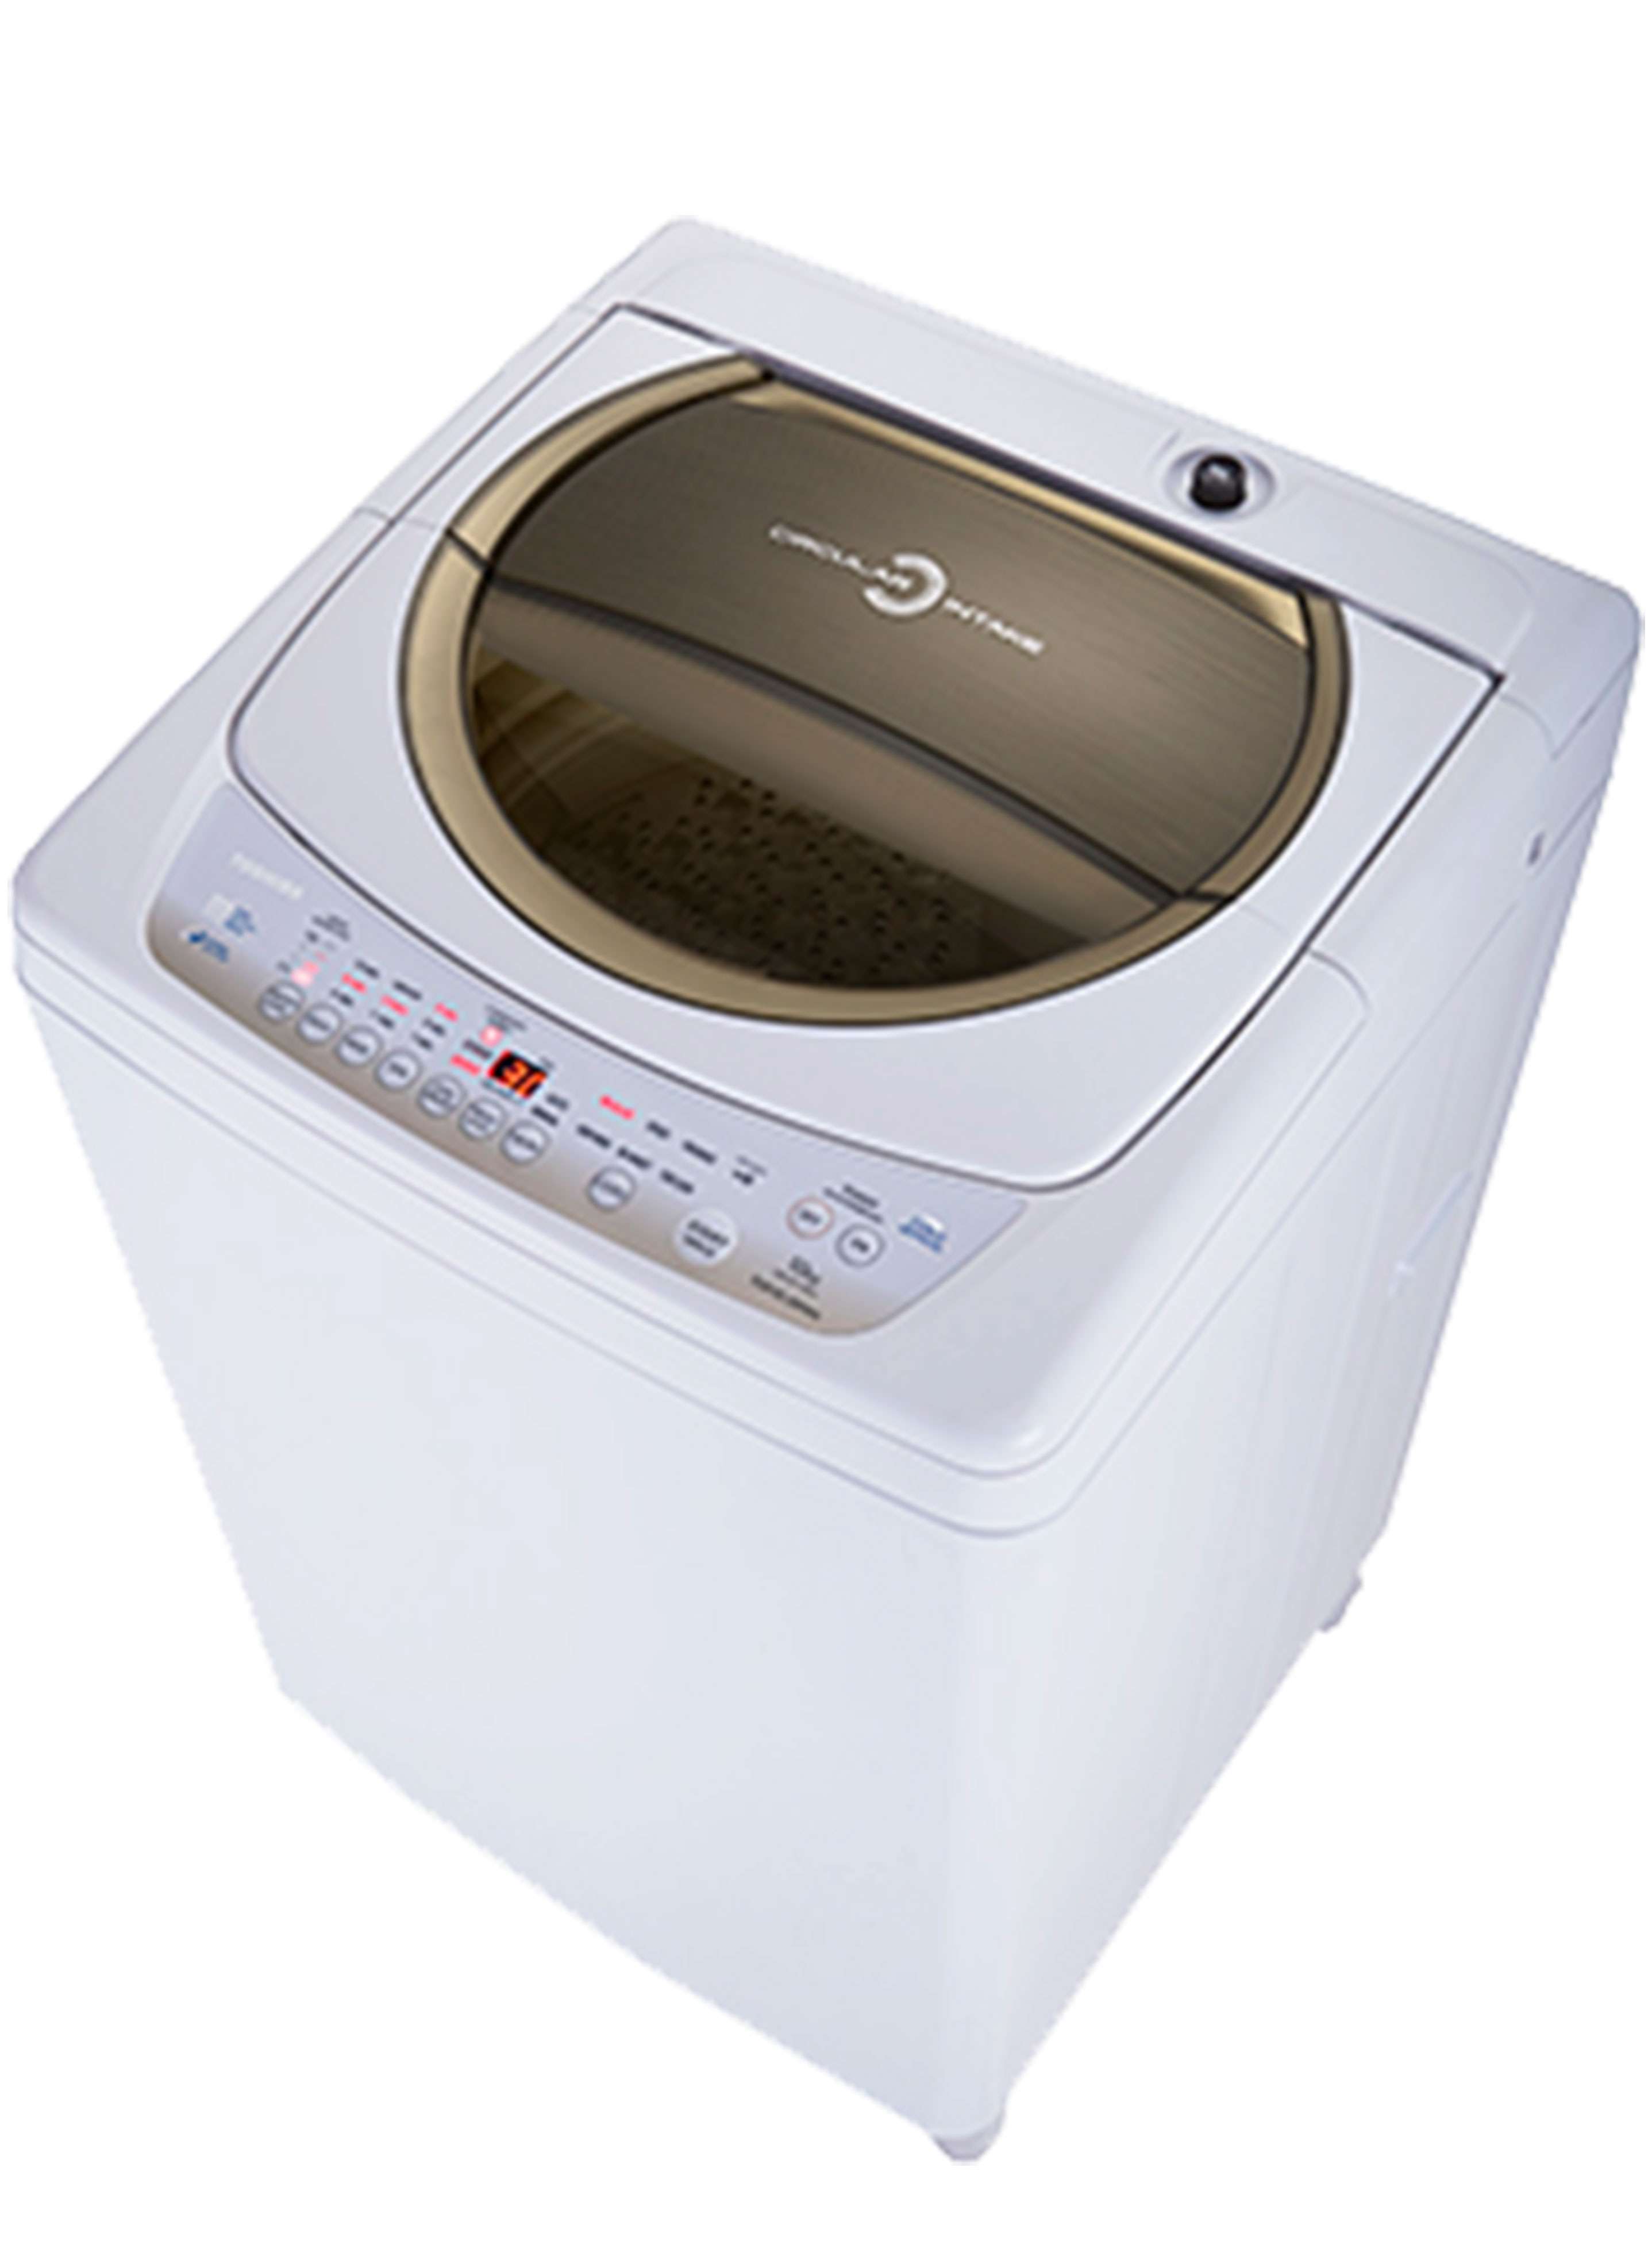 10 KG , TOP LOAD WASHER WITH HYDRO TWIN POWER WASH